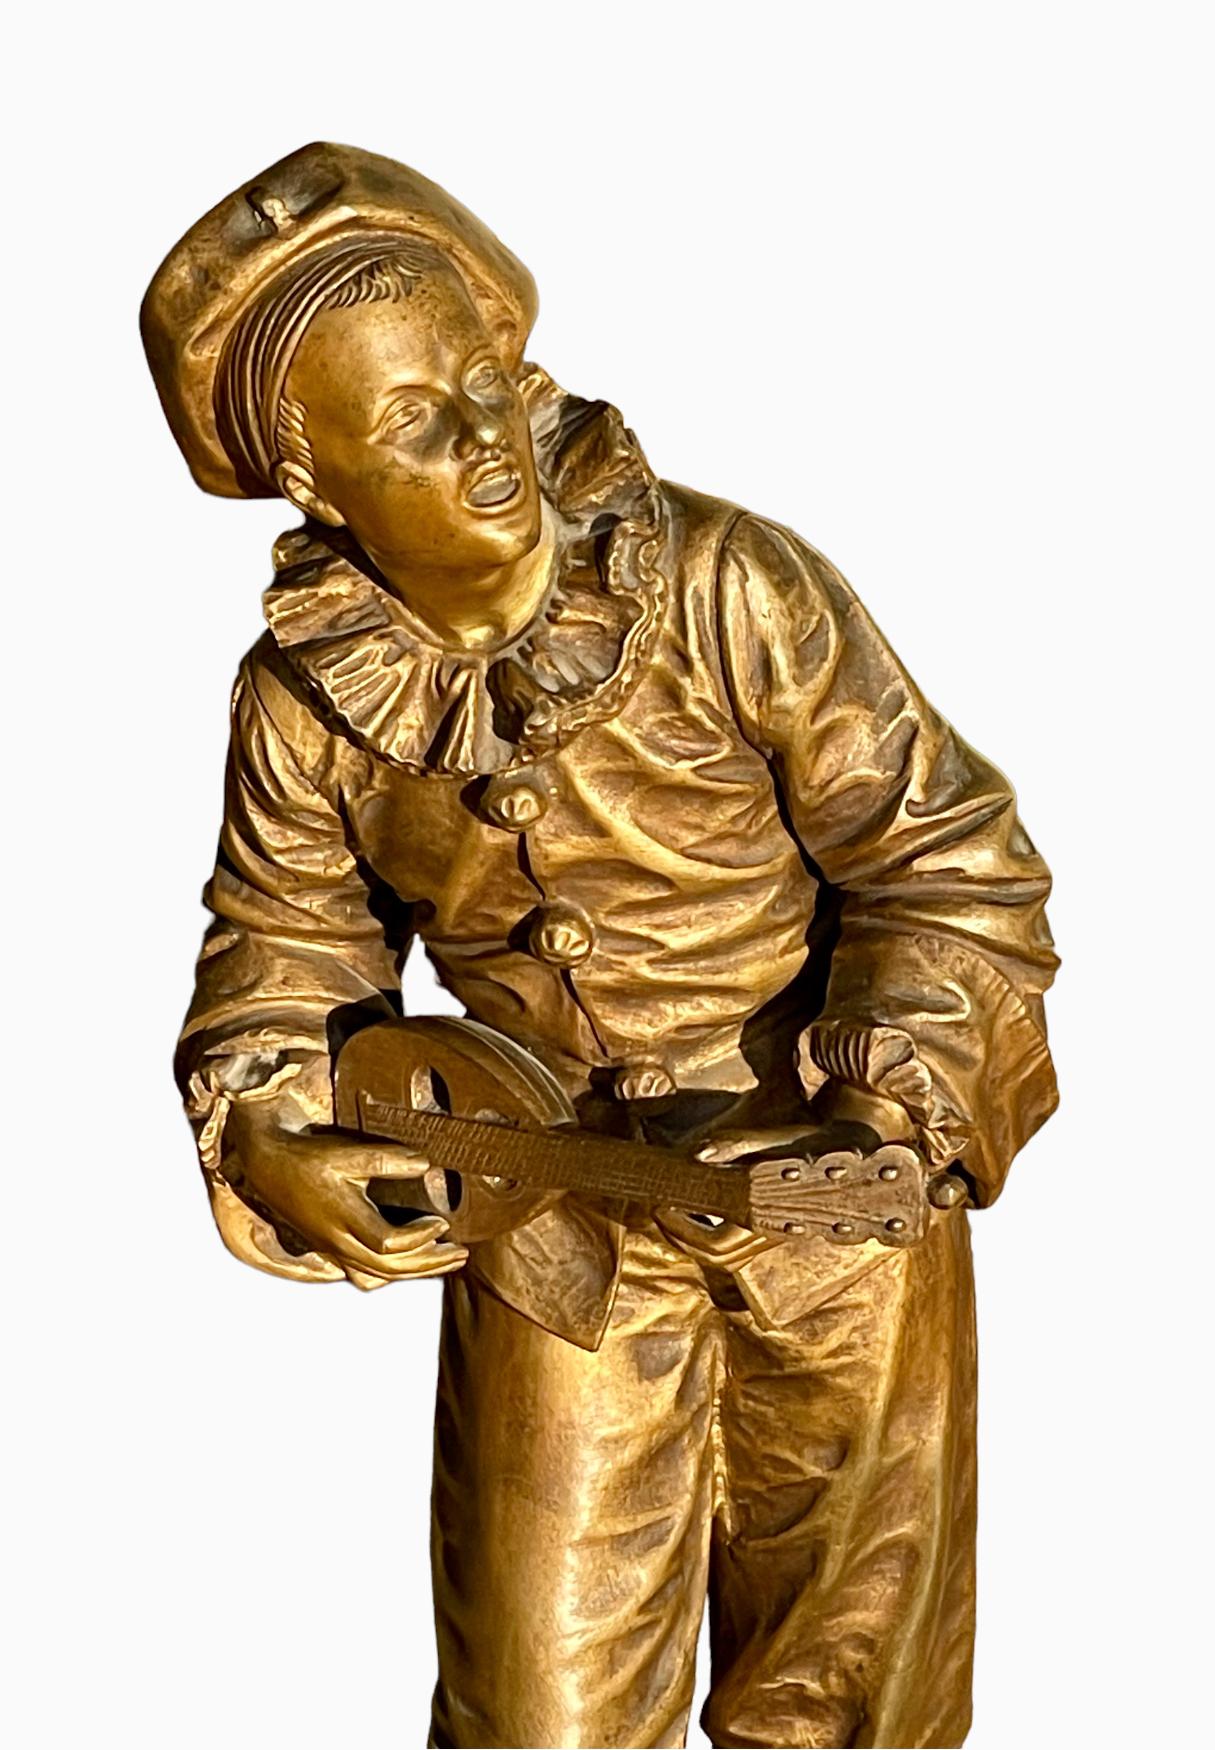 Pierrot in bronze playing the mandolin, signed 